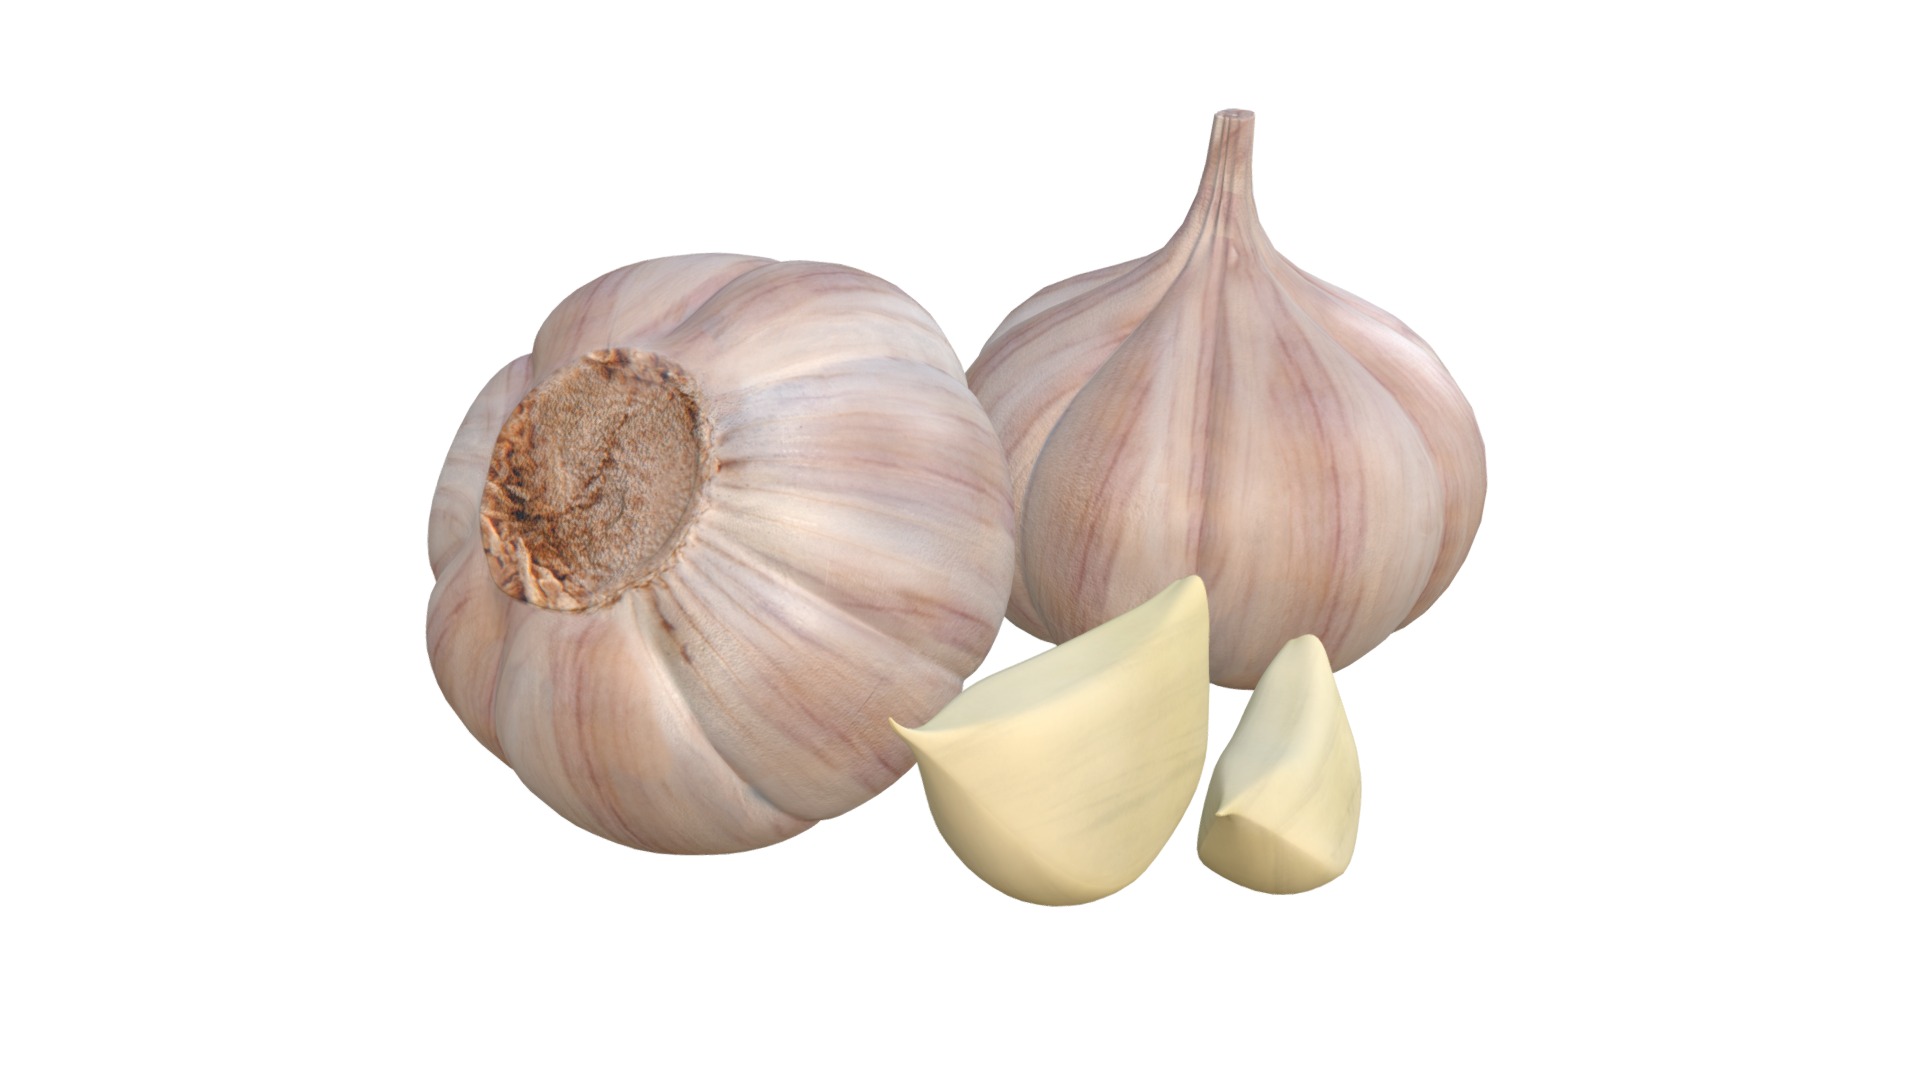 3D model Garlic - This is a 3D model of the Garlic. The 3D model is about a group of onions.